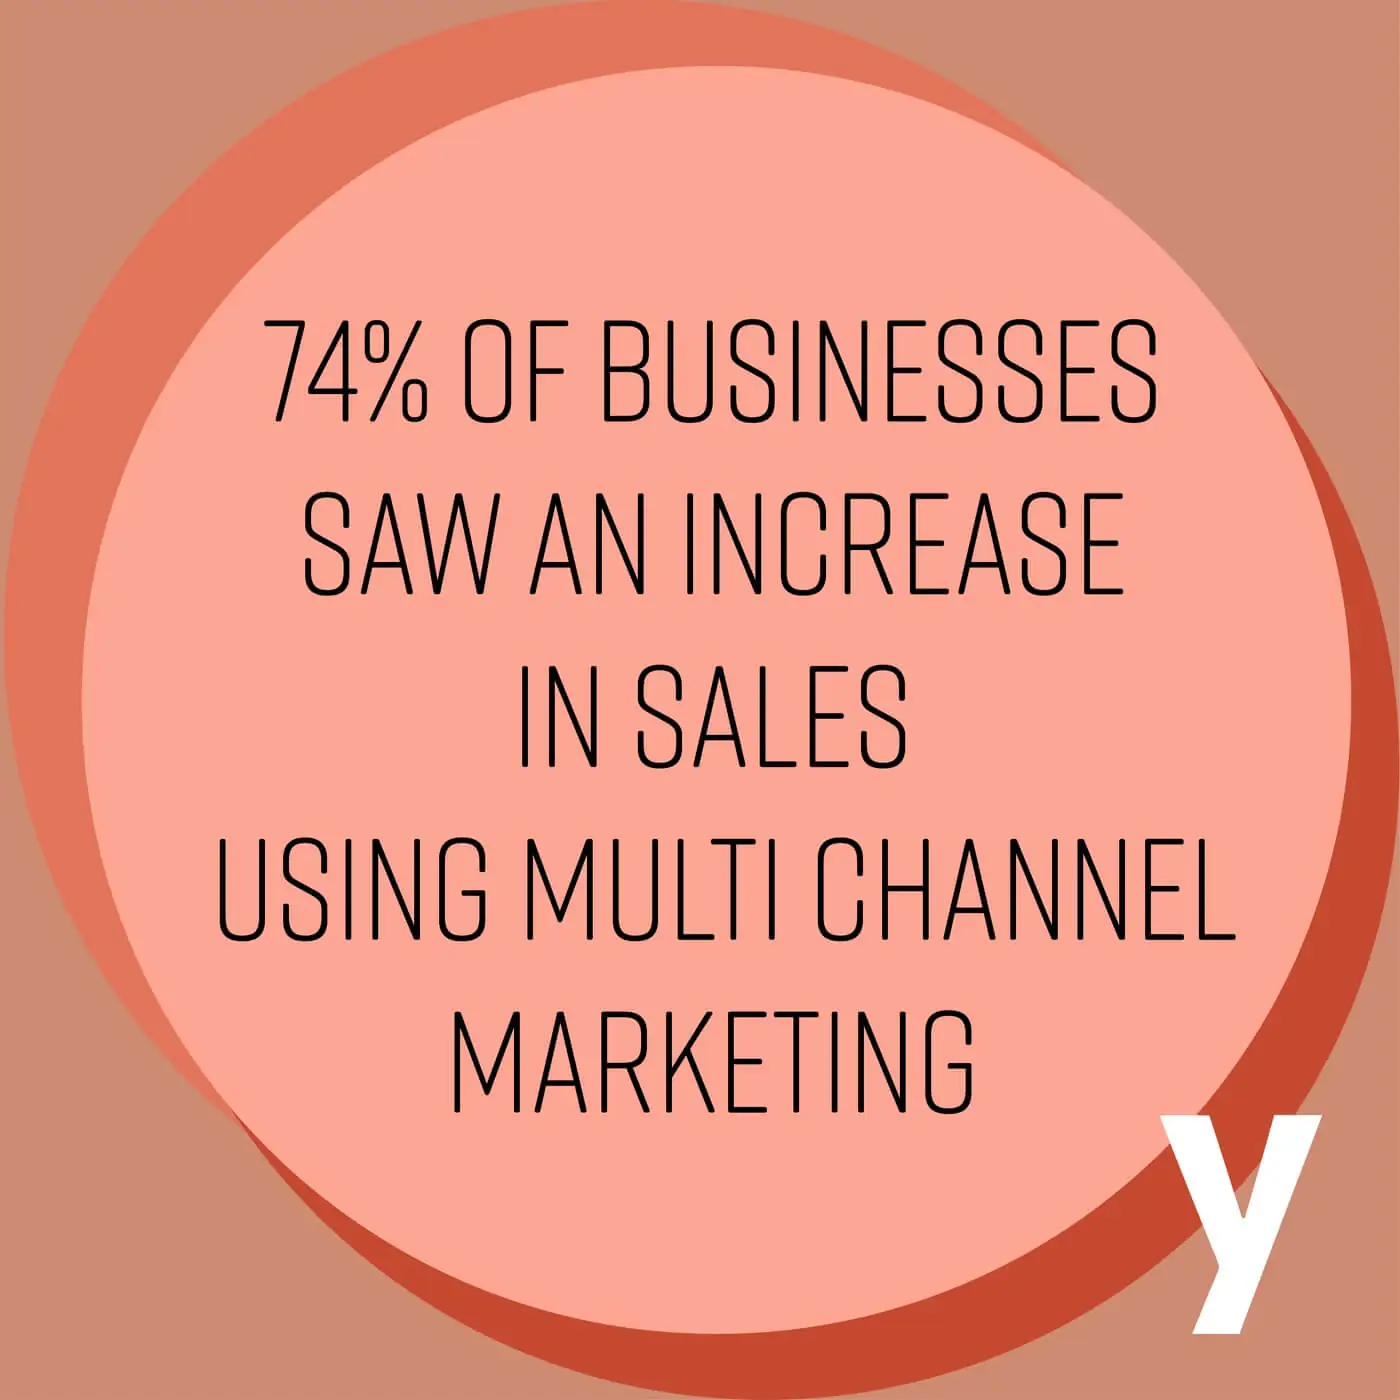 75% of businesses saw an increase in sales using multi channel marketing.